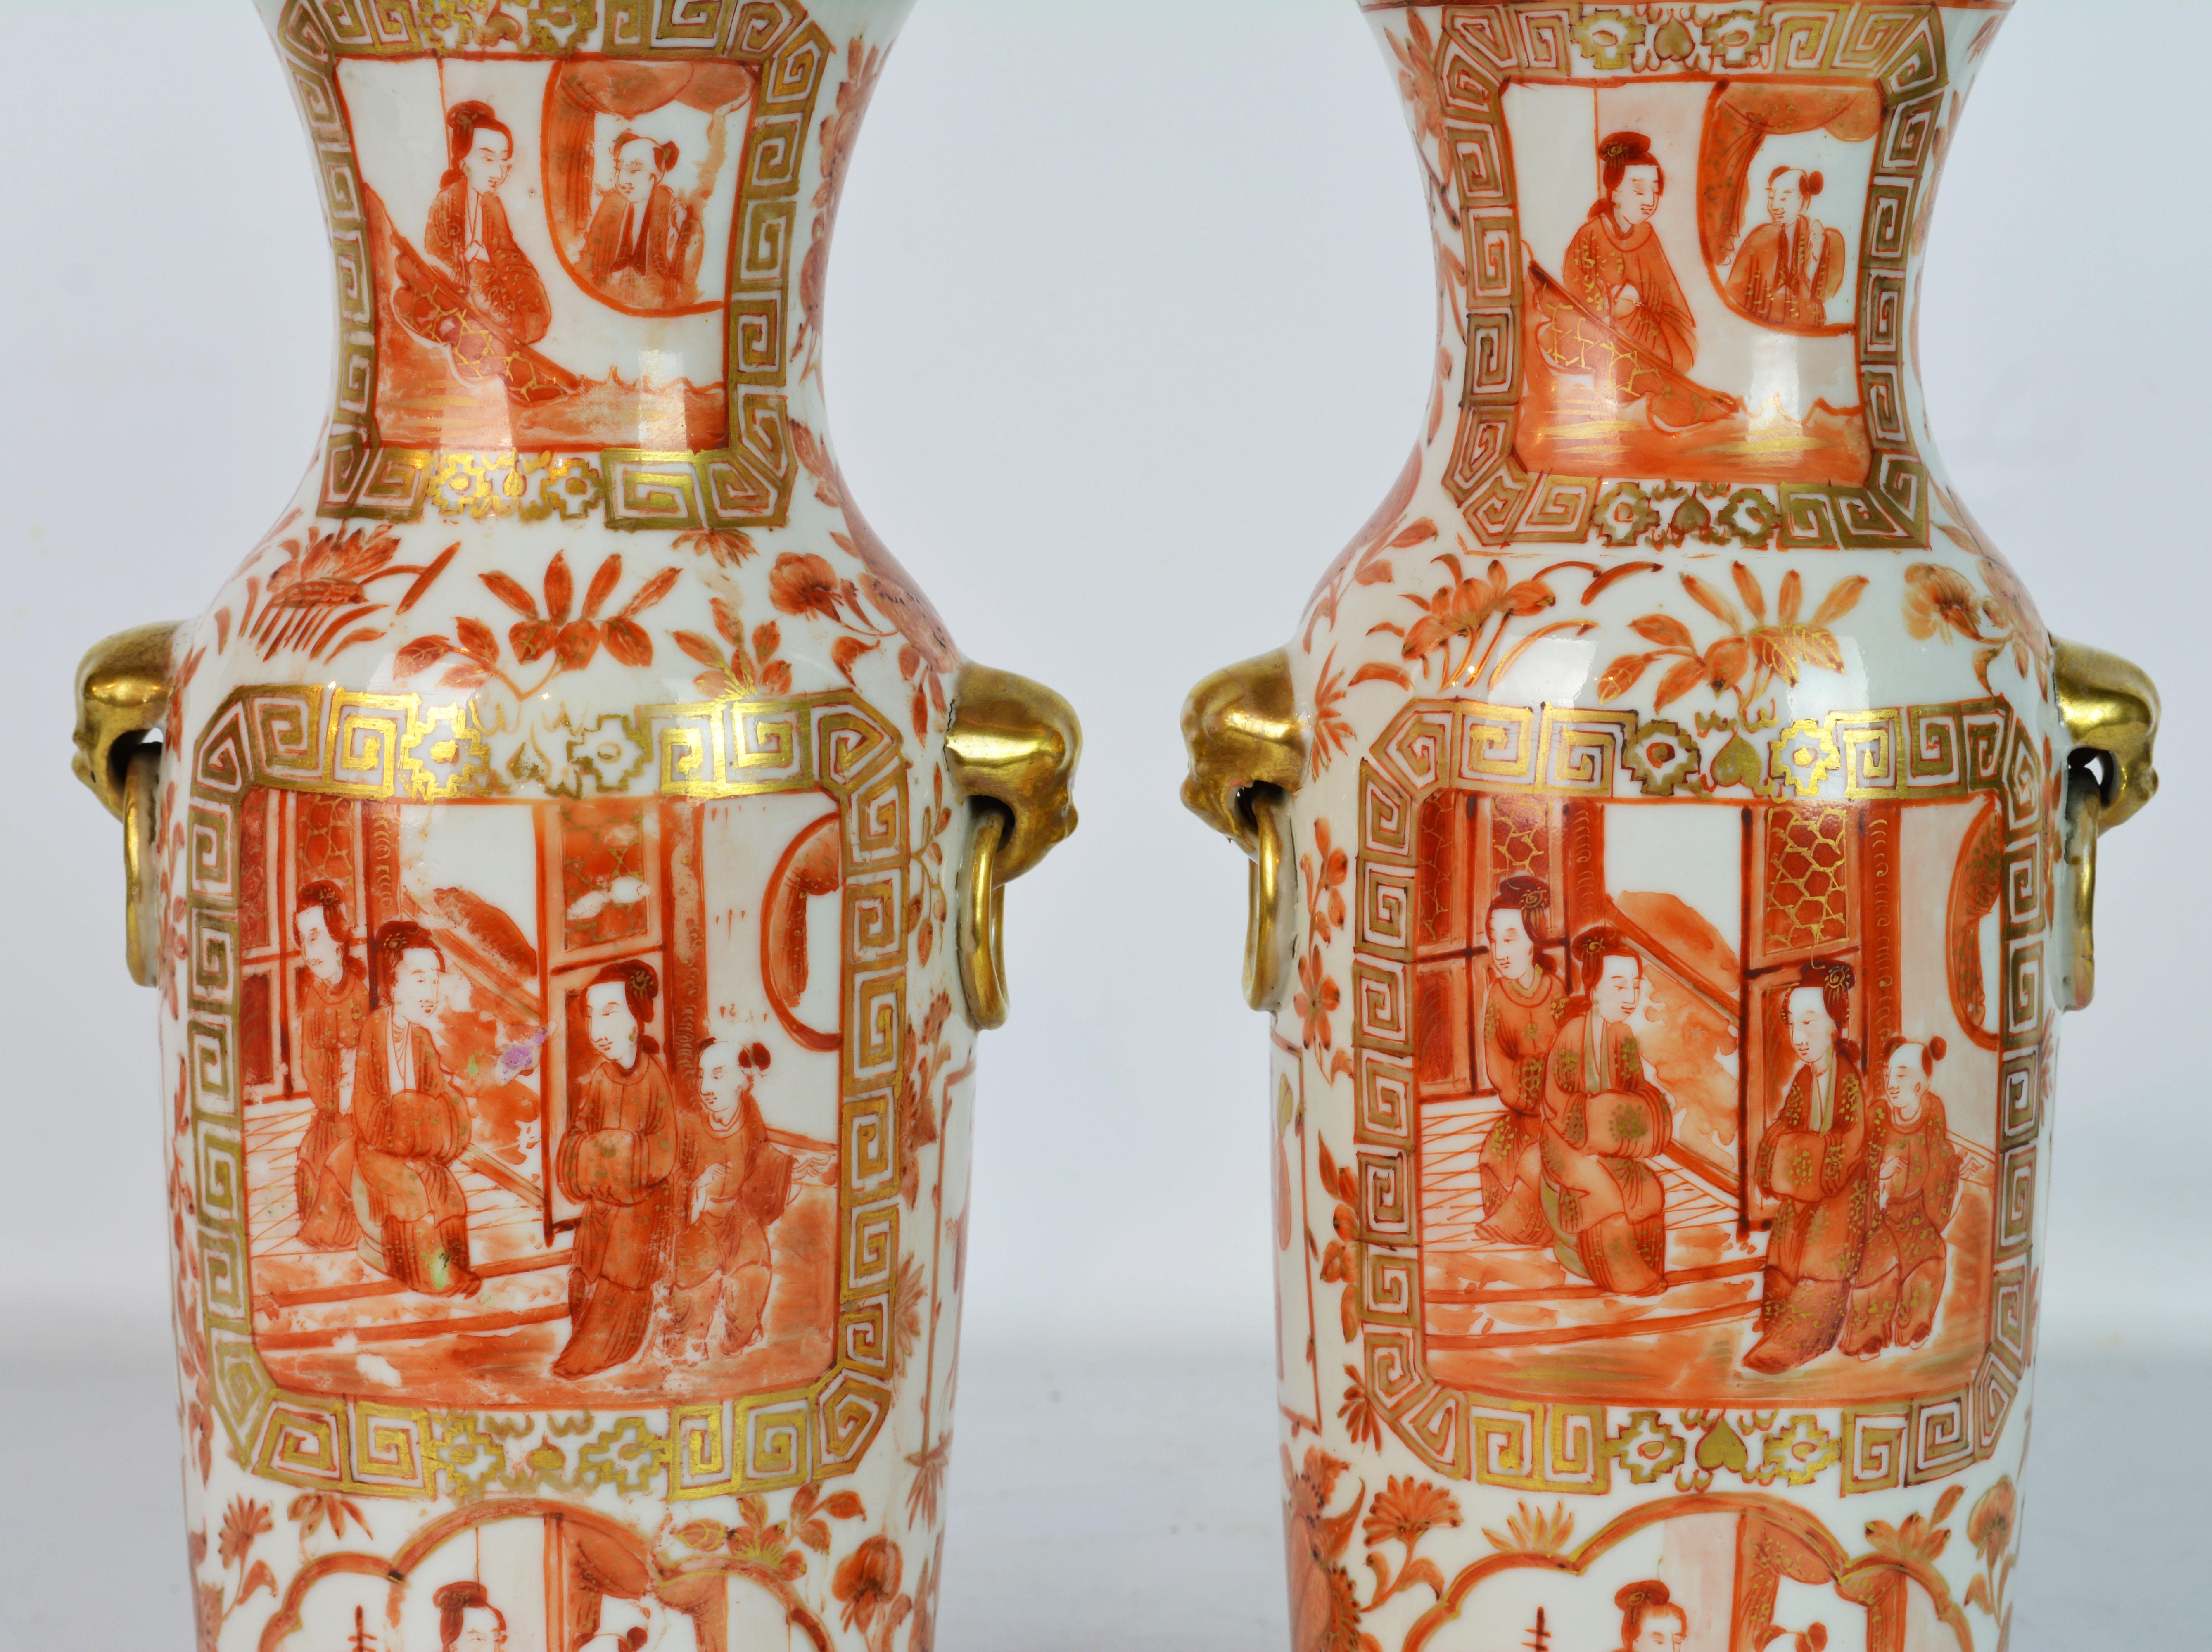 Rare 19th Century Orange and Gilt Decorated Chinese Export Daoguang Vases, Pair 3